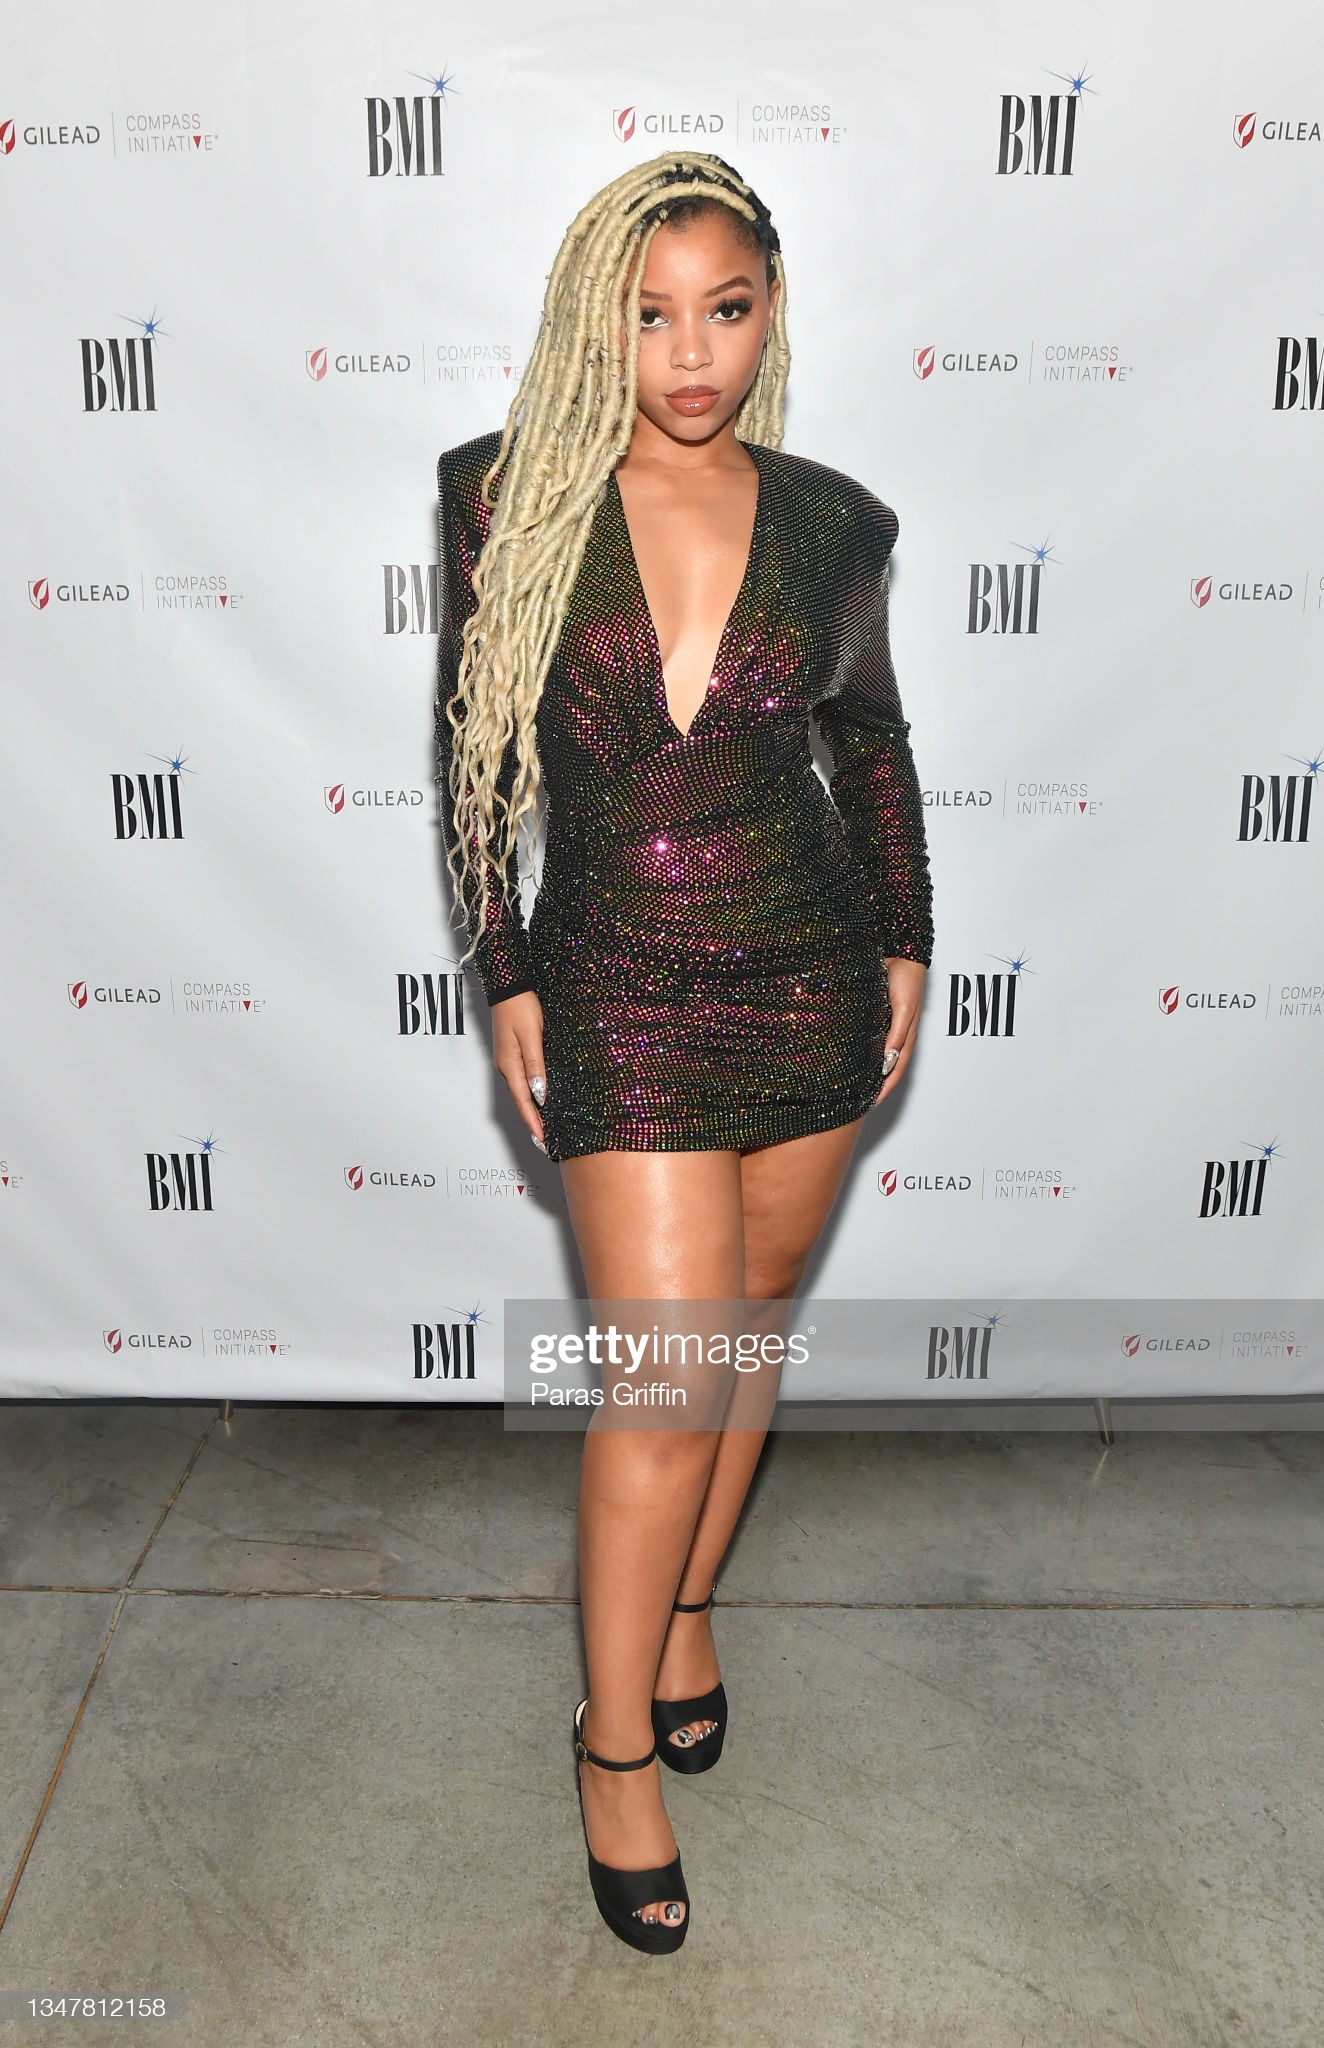 chloe-bailey-wears-alexandre-vauthier-bmi-presents-a-night-with-lil-nas-x-awards-dinner